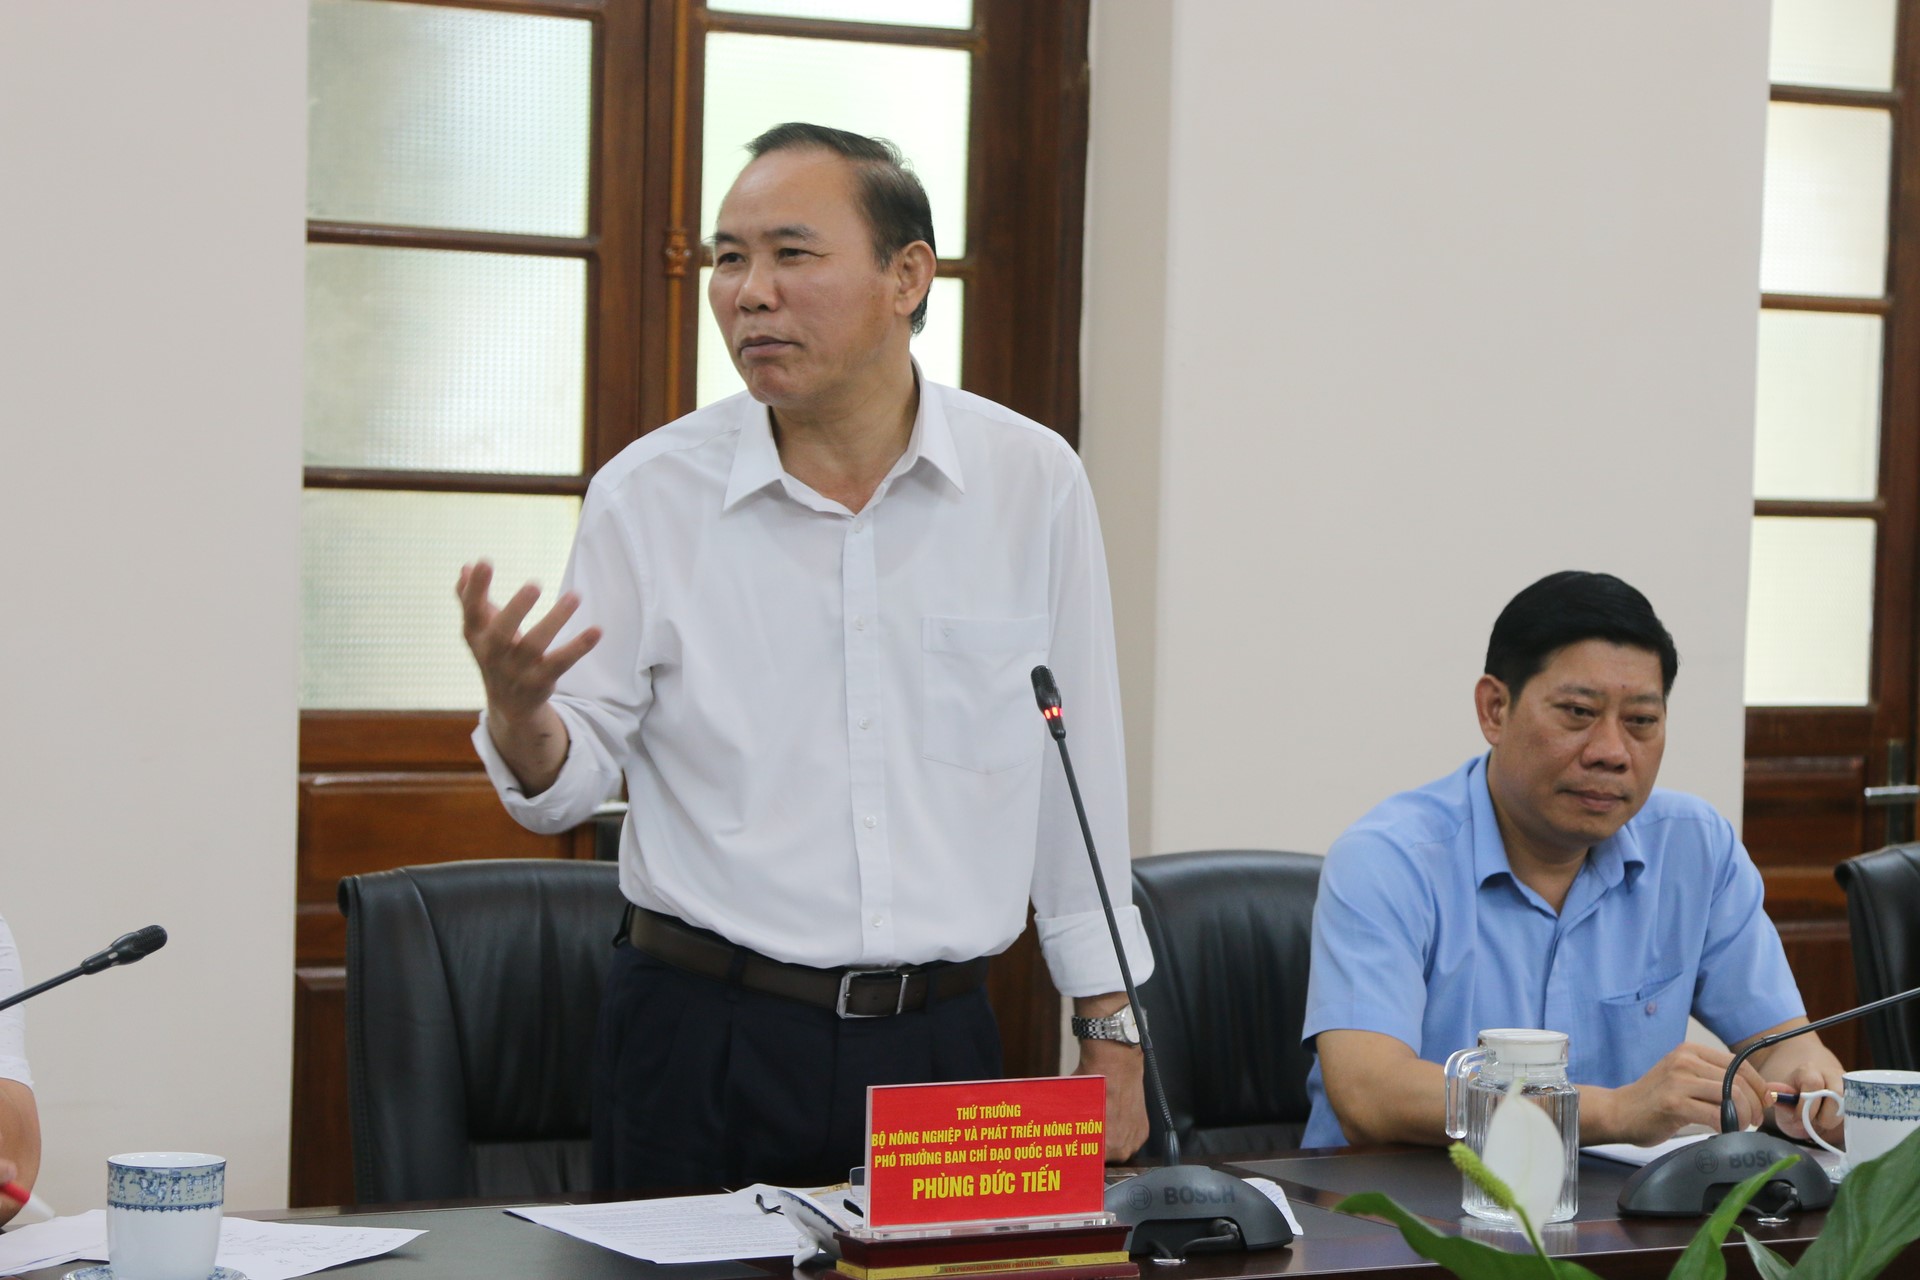 Deputy Minister Phung Duc Tien asked Hai Phong to focus on handling shortcomings in combating IUU fishing at the meeting after the actual inspection. Photo: Dinh Muoi.